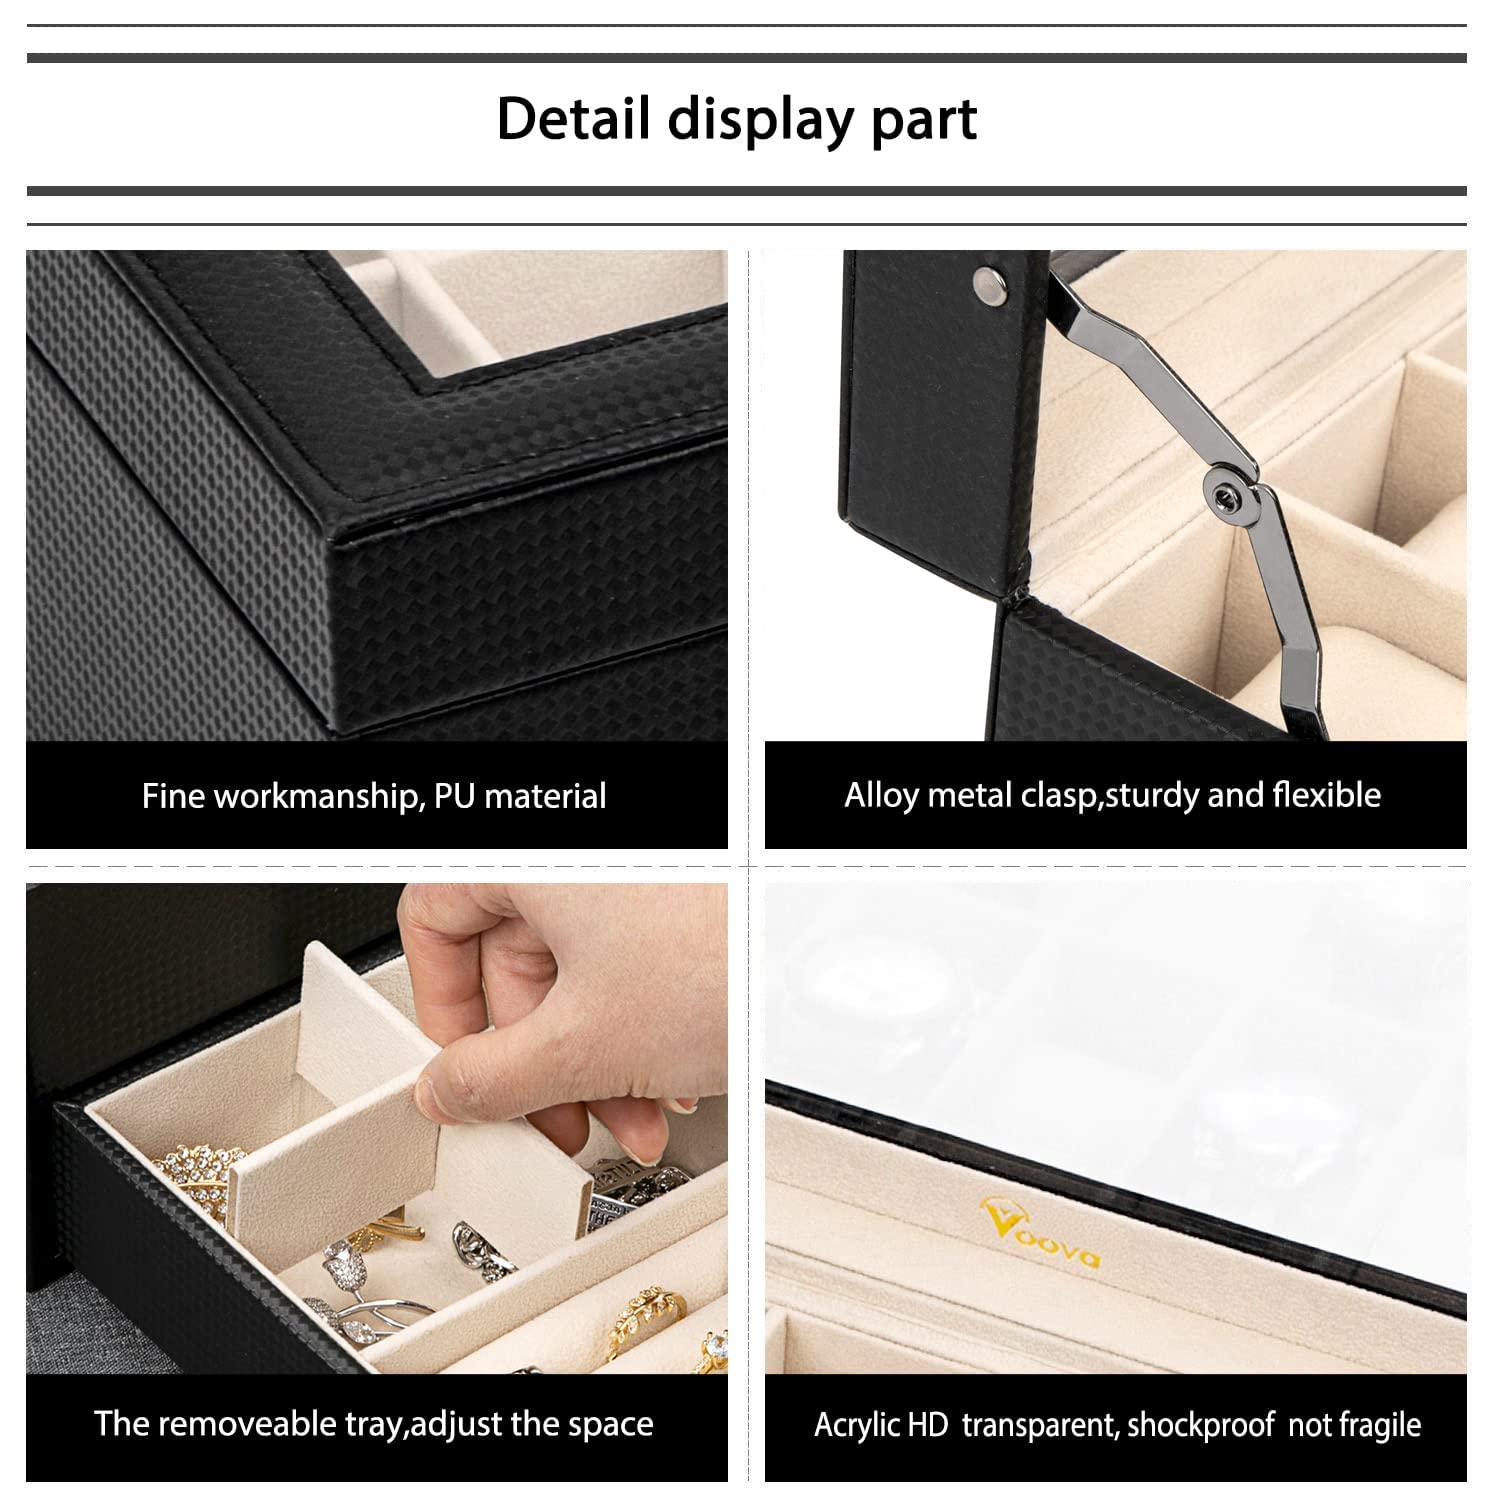 Voova Jewelry Box Watch Boxes Organizer for Men Women, 2 Layer Large 12 Slot PU Leather Watch Storage Case, Glass Top Jewelry Display Holder for Watches Sunglasses Rings Necklaces Bracelets,Black